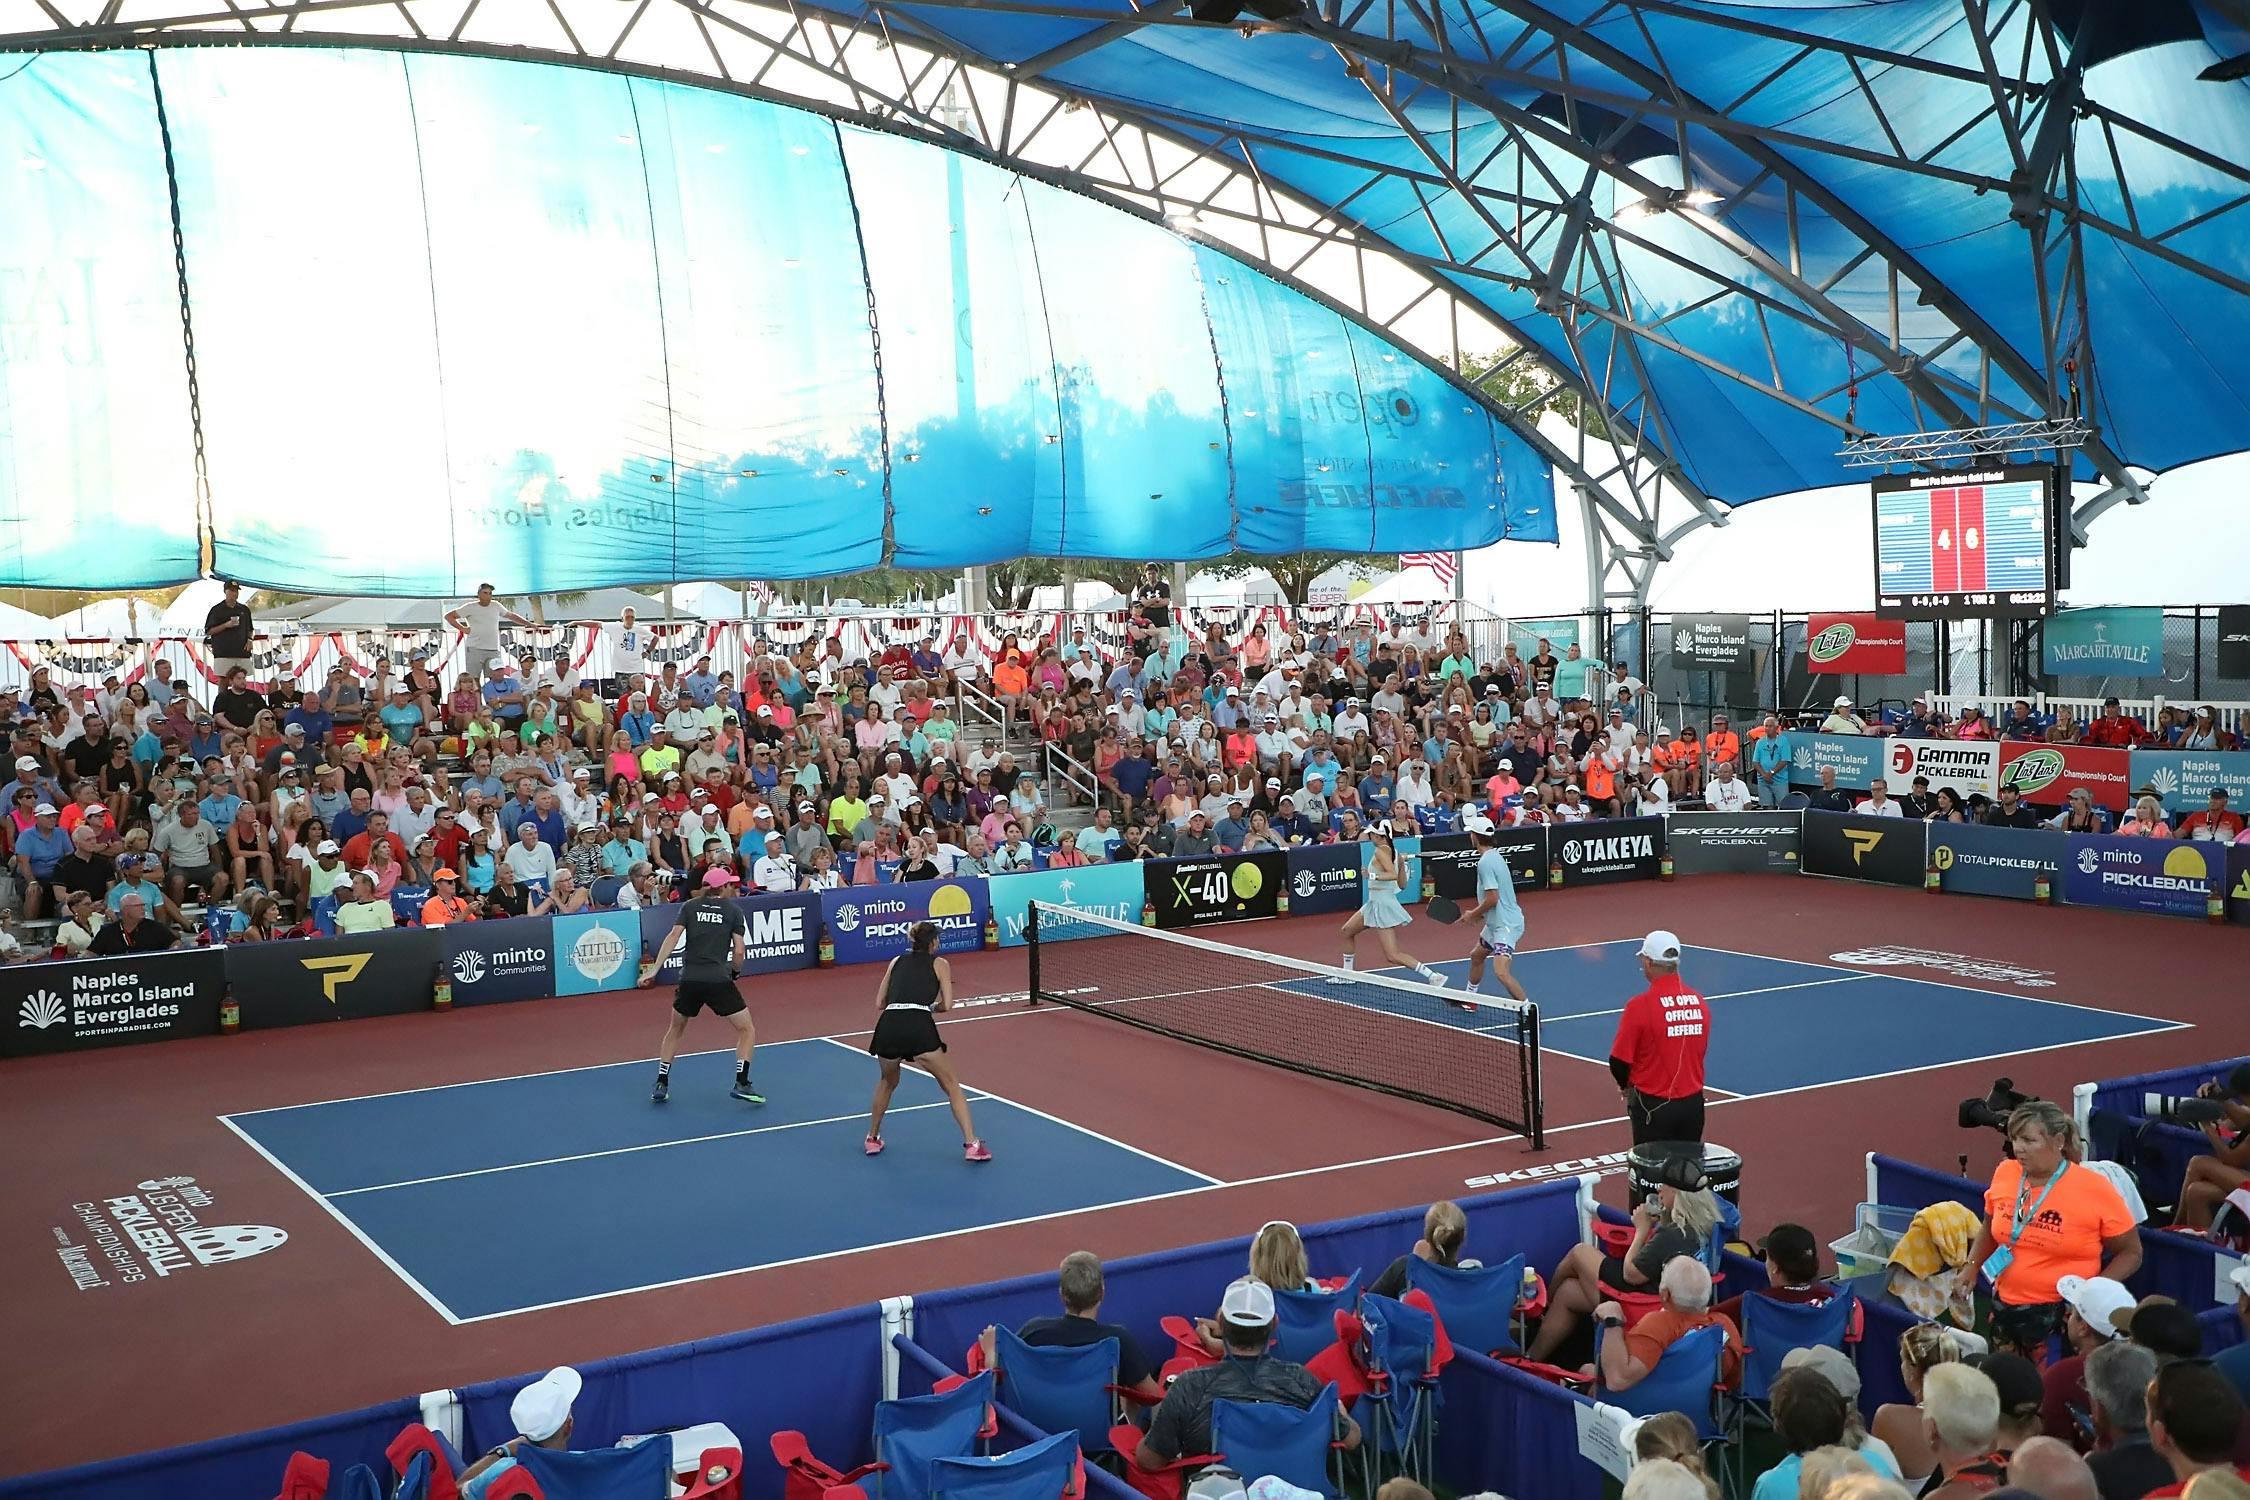 7 TIPS TO DOMINATE THE US OPEN PICKLEBALL CHAMPIONSHIPS (OR ANY OTHER PICKLEBALL TOURNAMENT)